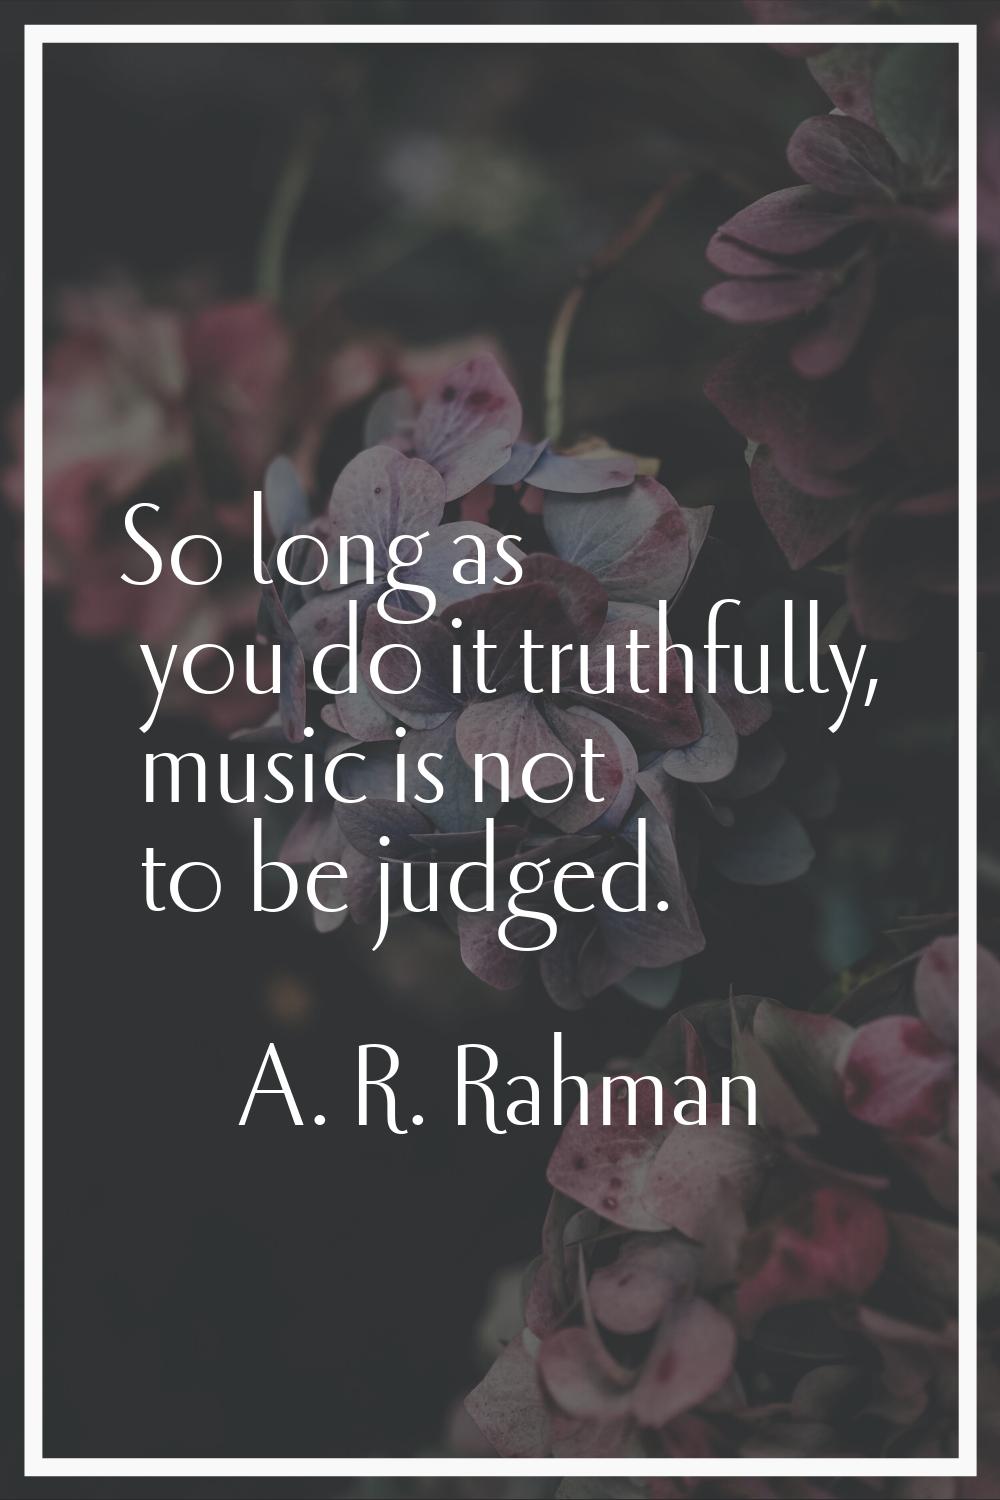 So long as you do it truthfully, music is not to be judged.